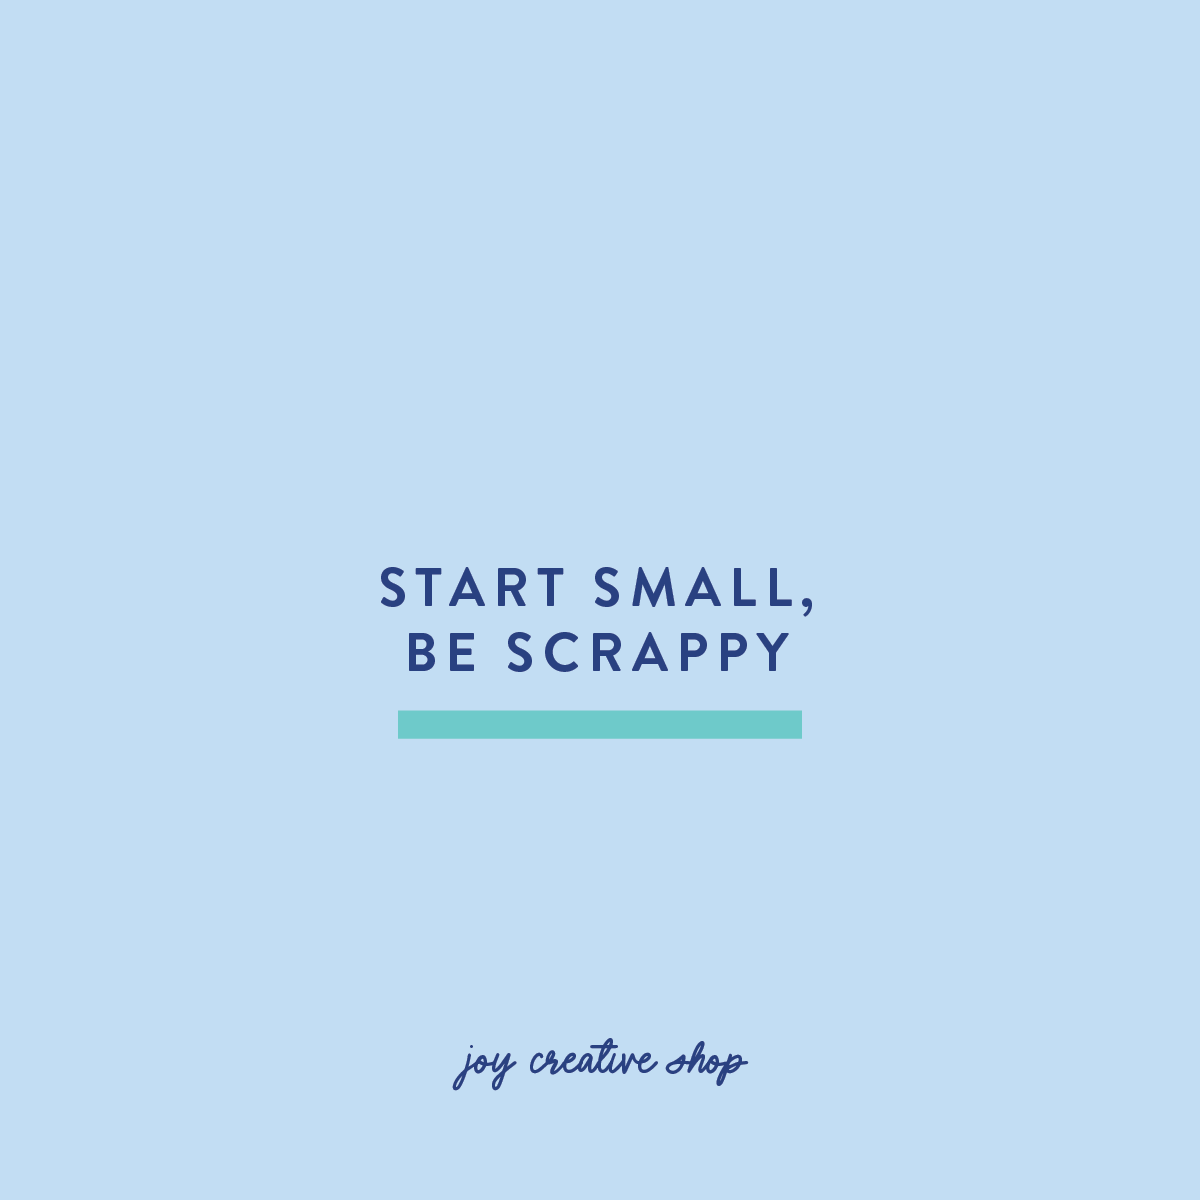 Start small, be scrappy